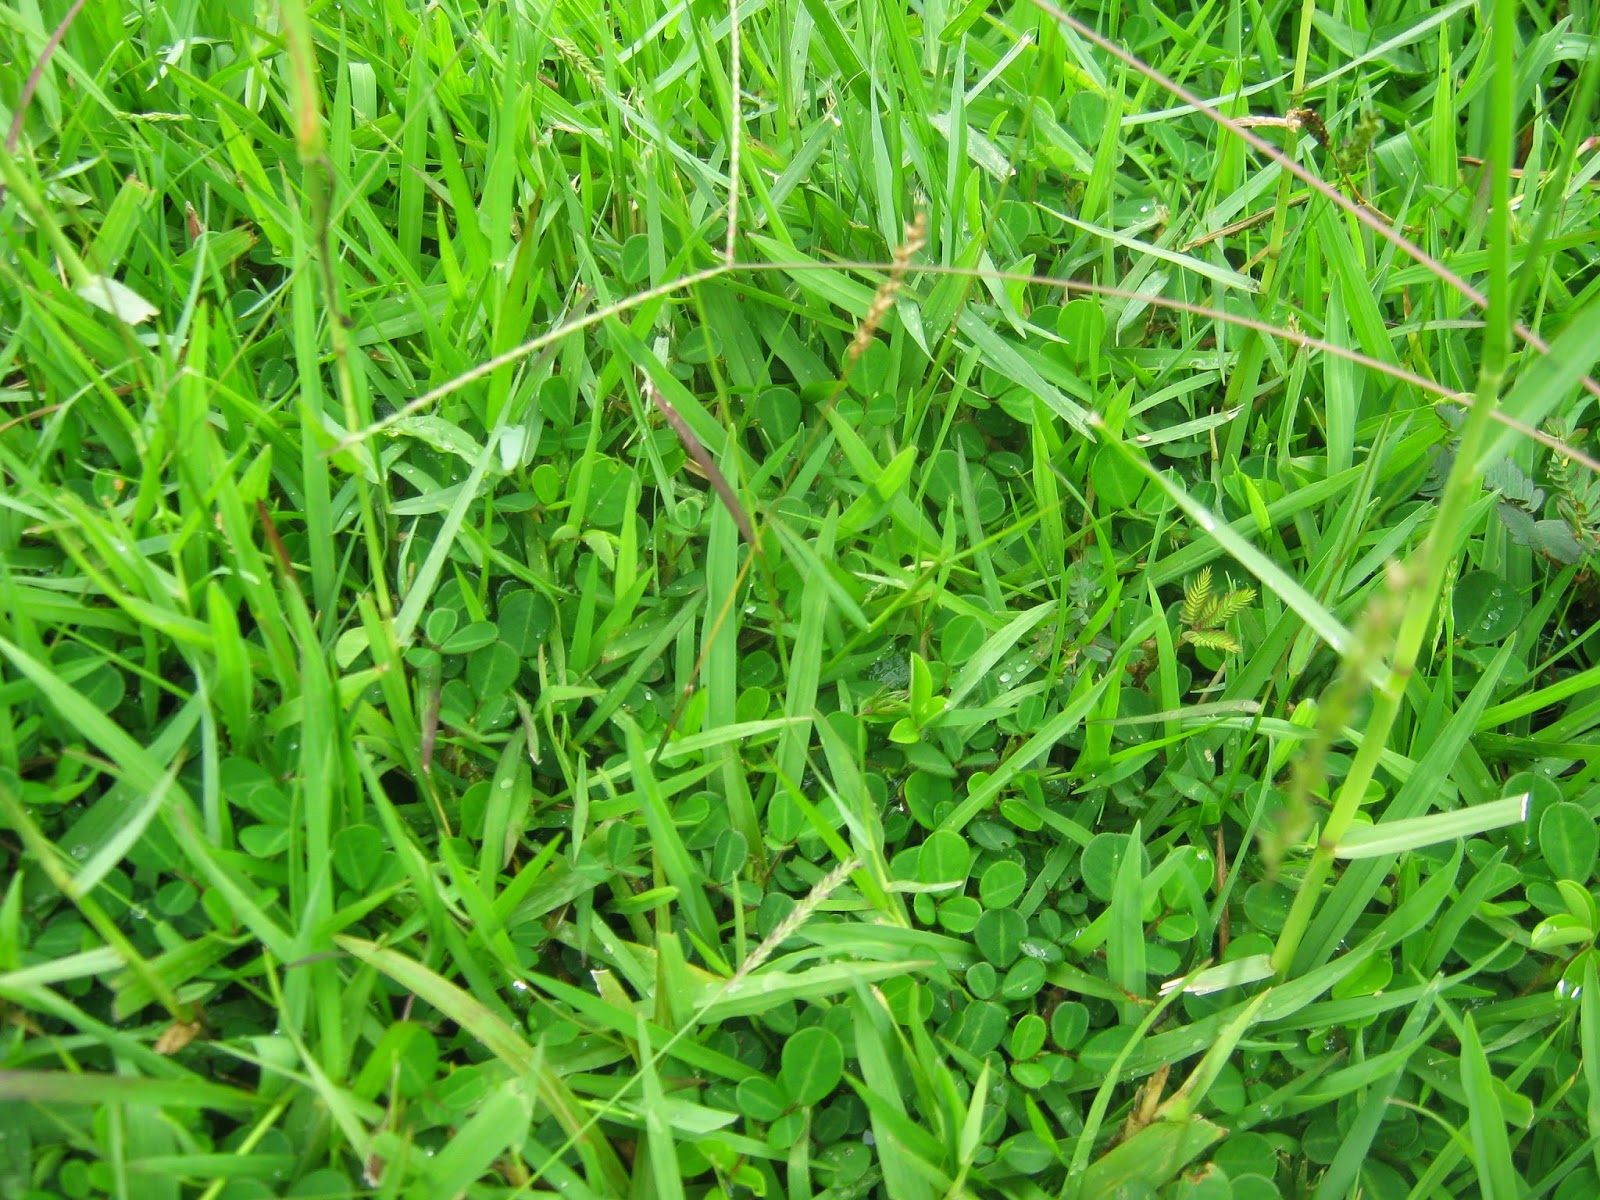 Southern Lawn Weeds Identification